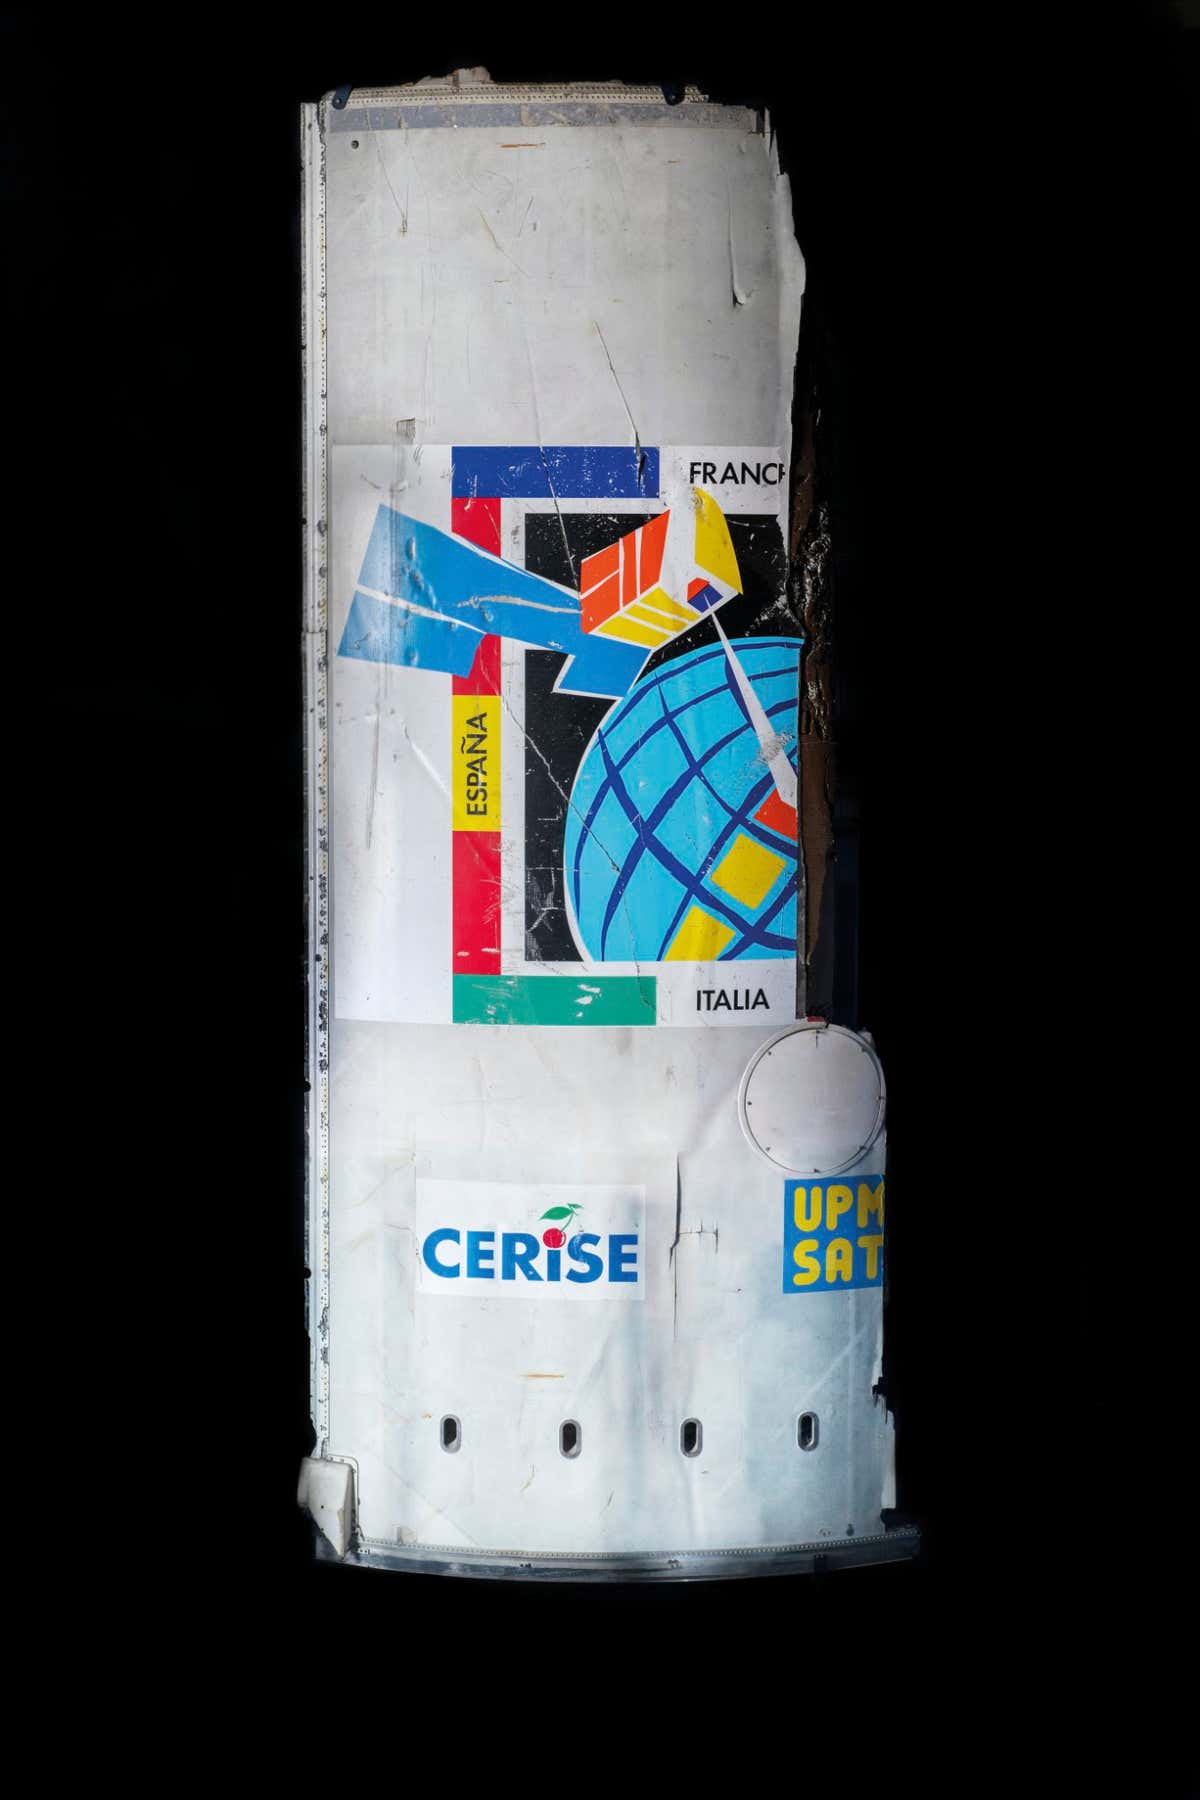 SPACE DEBRIS FROM ARIANE 4 ROCKET Cerise was a French military reconnaissance satellite, launched in 1995 on an Ariane 4 rocket. A year later it was struck by a piece of space debris. The impact severed a boom arm that helped stabilise the spacecraft. This accident was the first verified collision between an active satellite and a piece of space debris. This piece of the Ariane 4 is from the National Air and Space Museum of France?s collection.